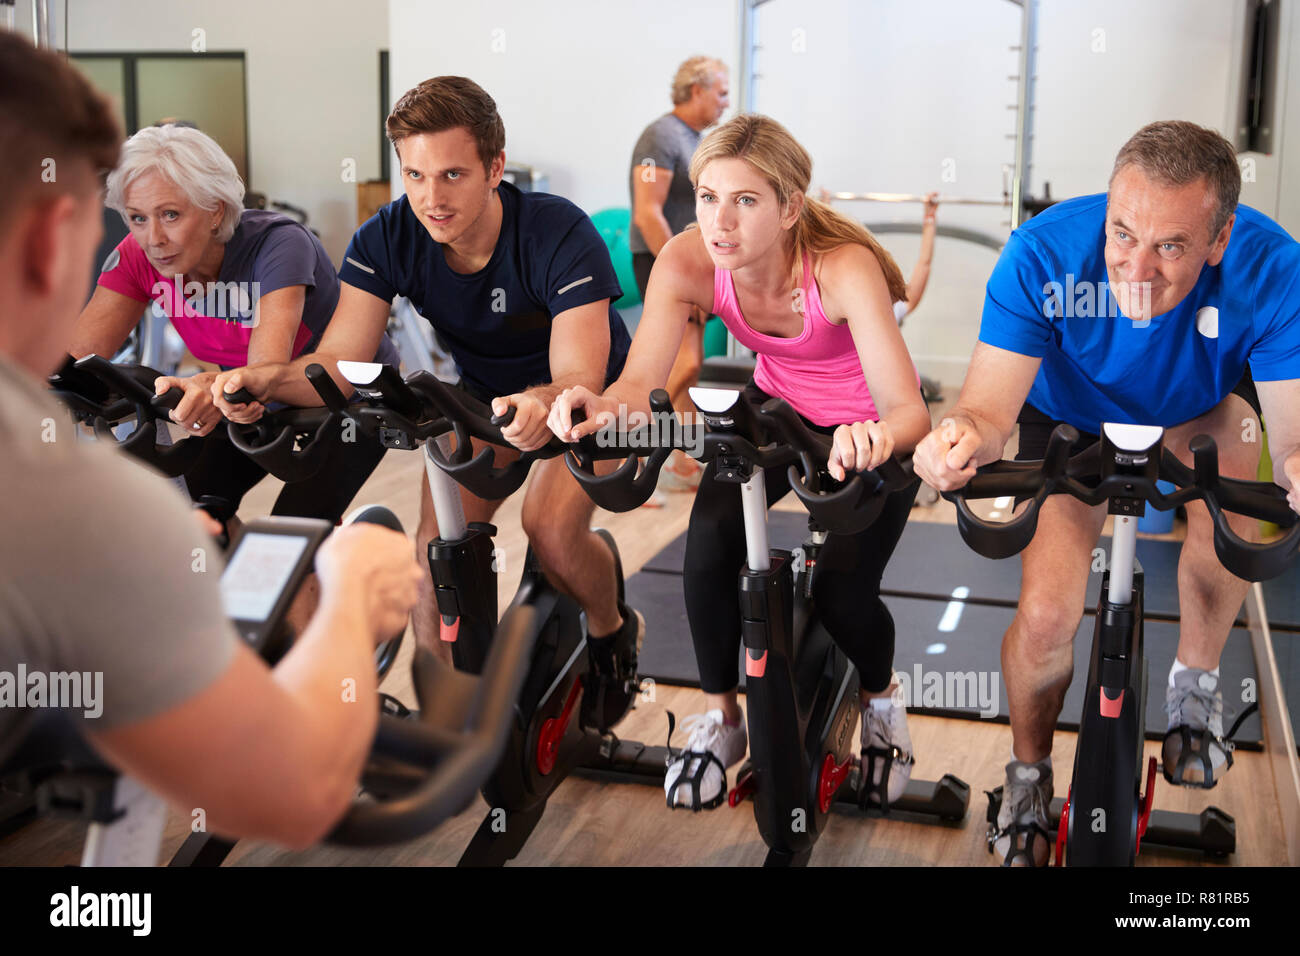 Male Trainer Taking Spin Class In Gym Stock Photo